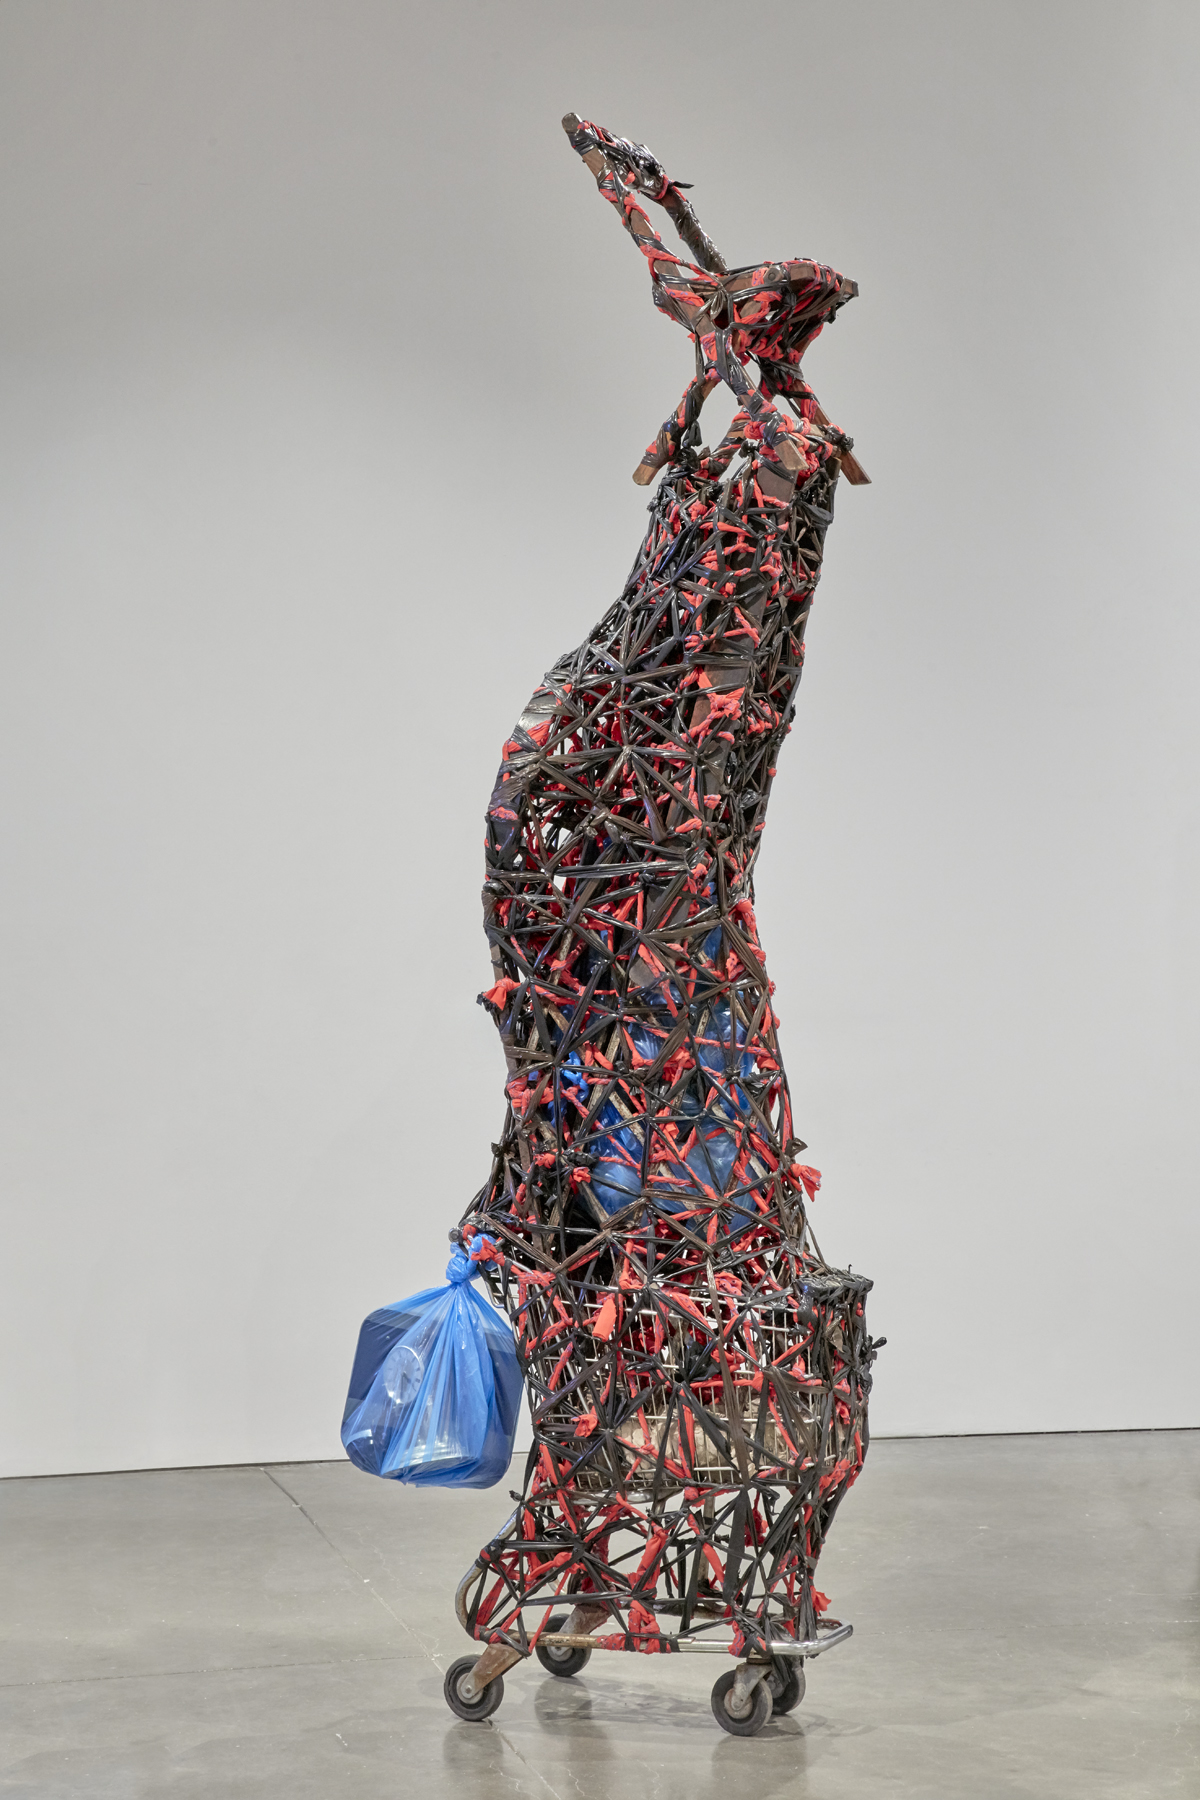 A sculpture made of various objects piled on top of a metal shopping cart, tightly wrapped and bound with twisted red and black plastic, culminating in a simple folding chair at the very top.